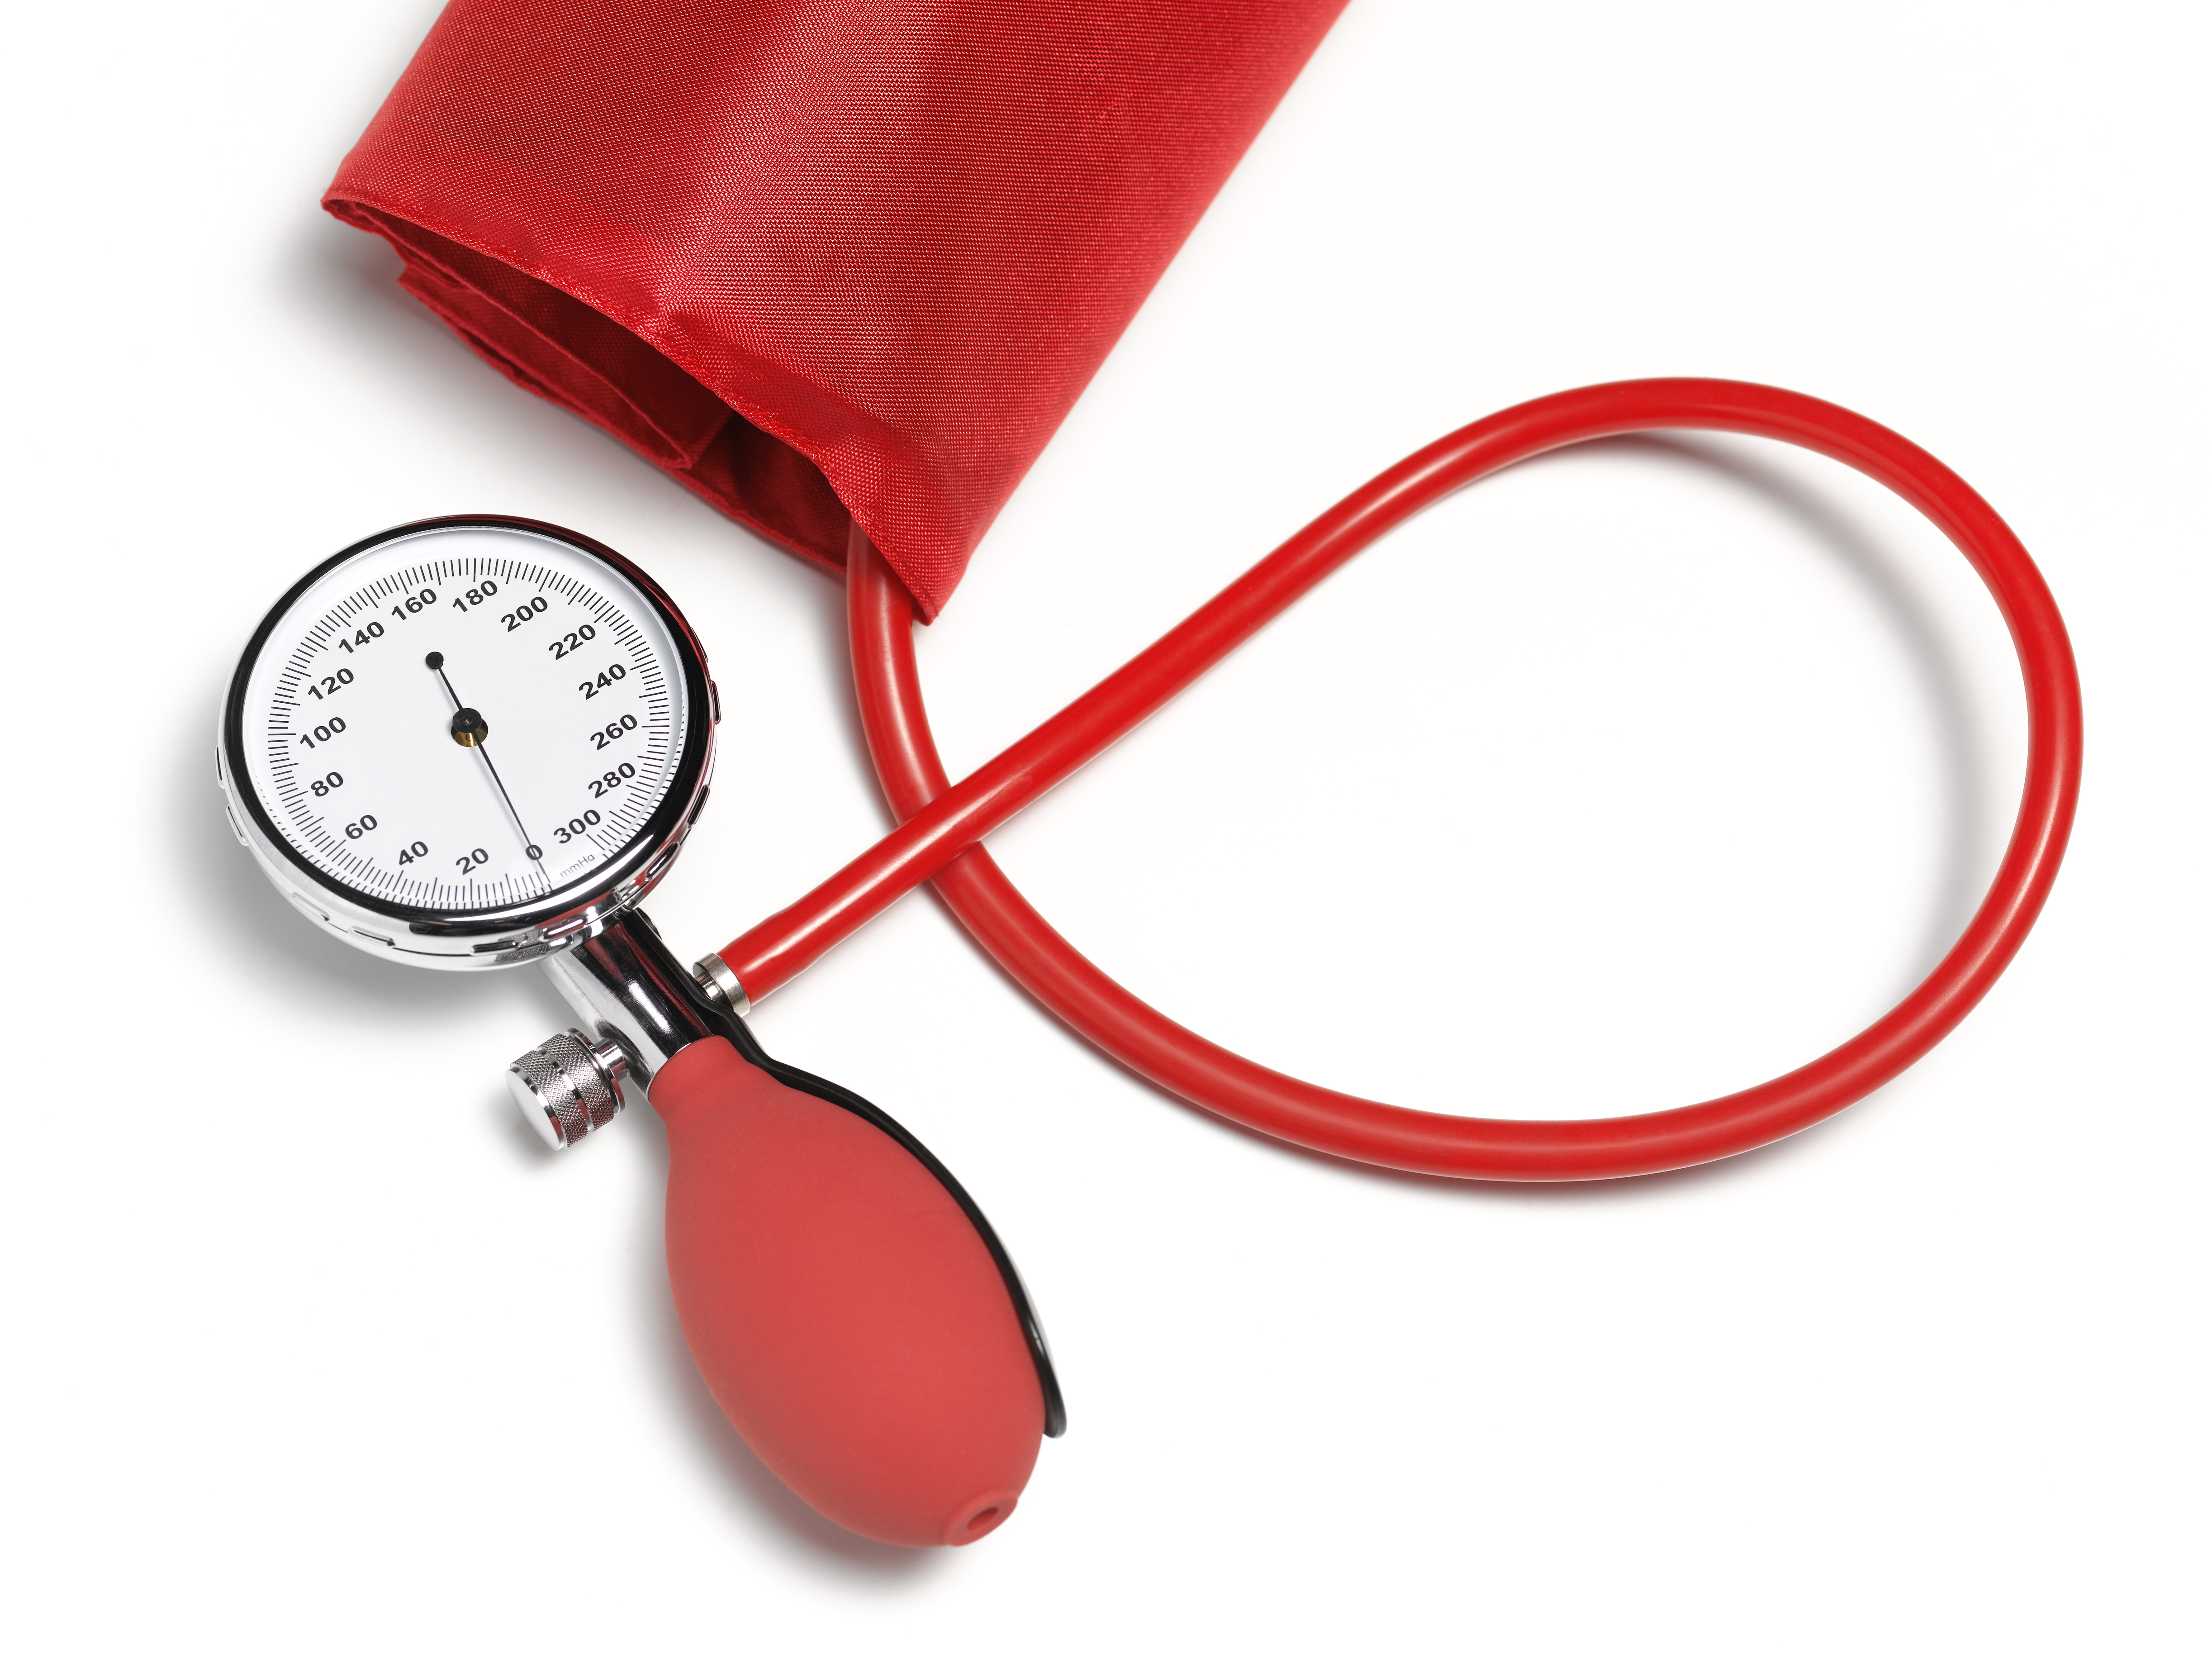 Why Blood Pressure Is Rising Worldwide